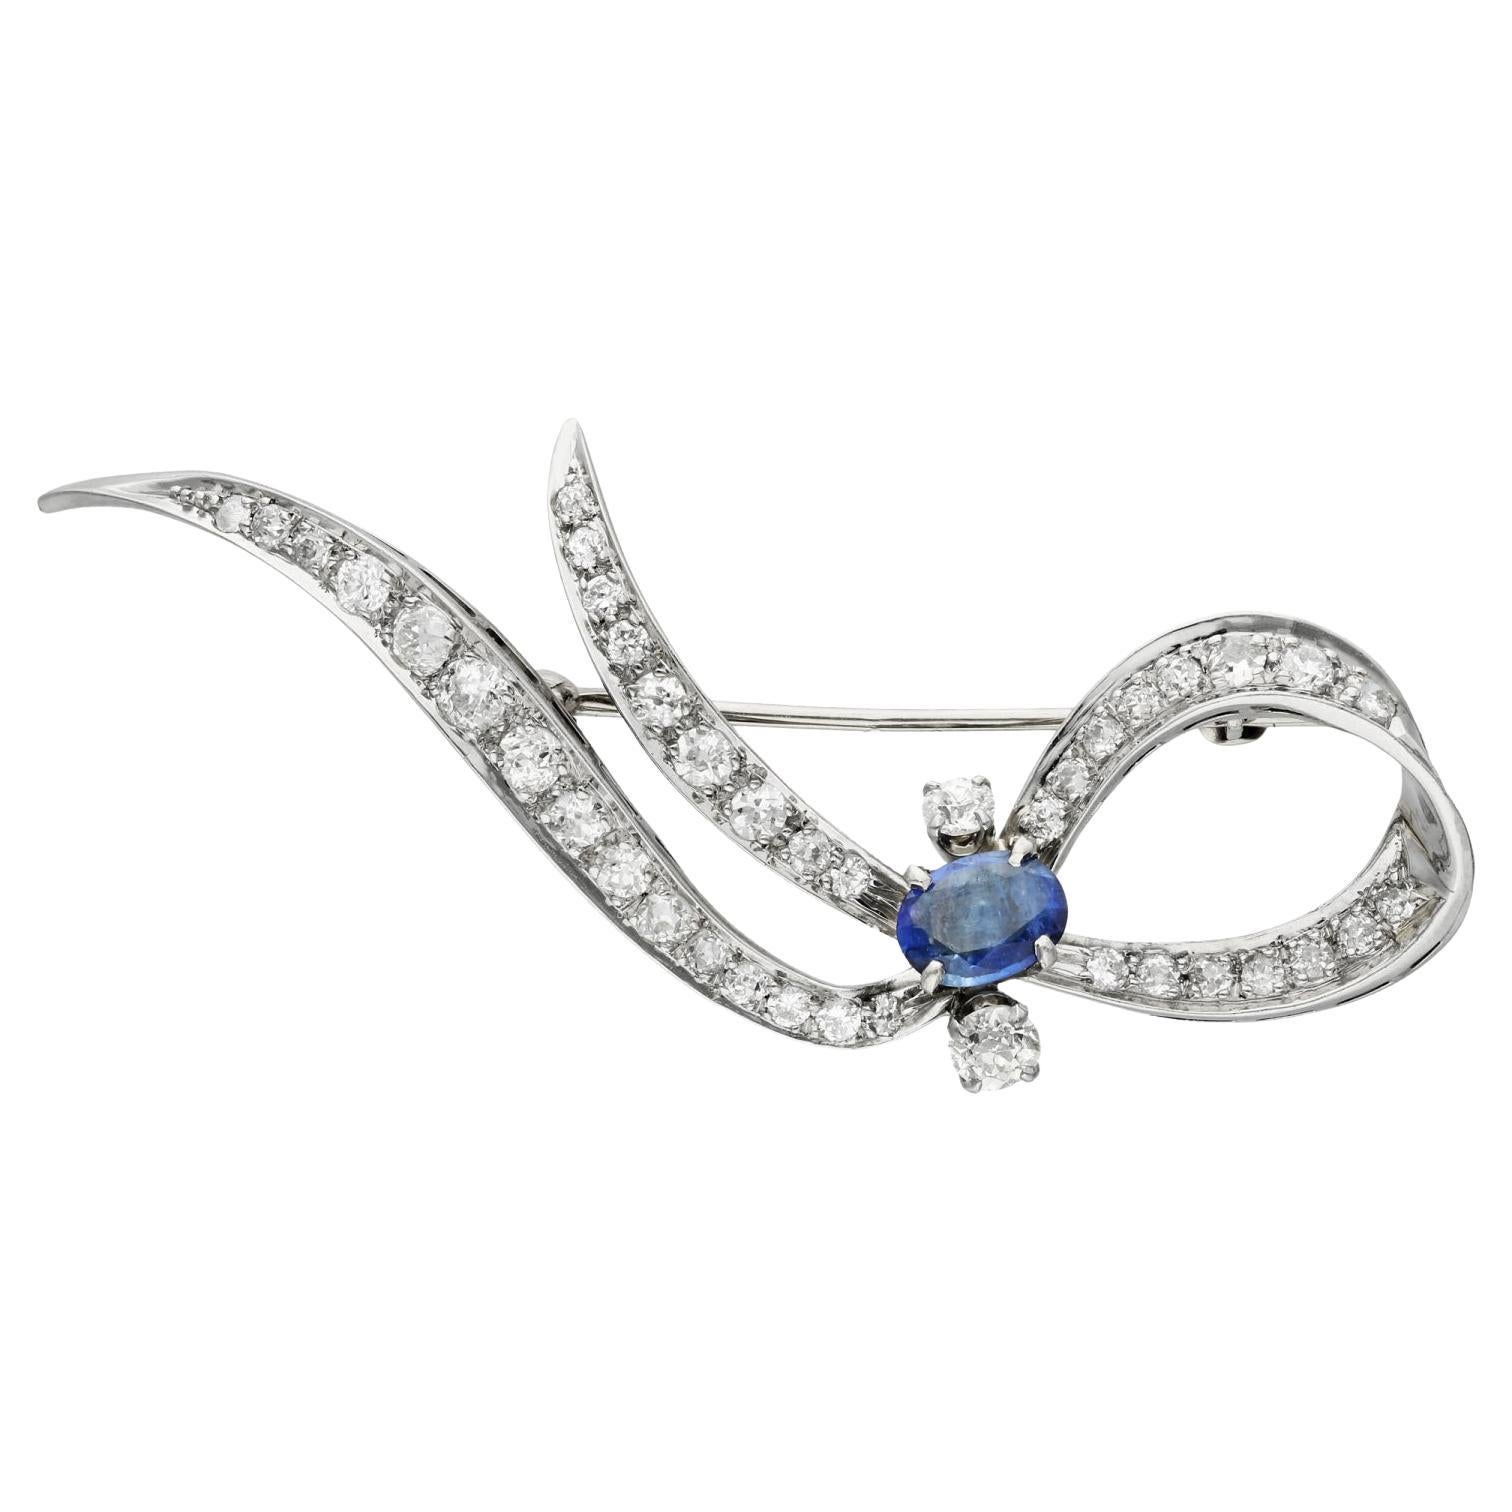 14ct White Gold 0.60ct Sapphire & 1.45ct Diamond Brooch For Sale